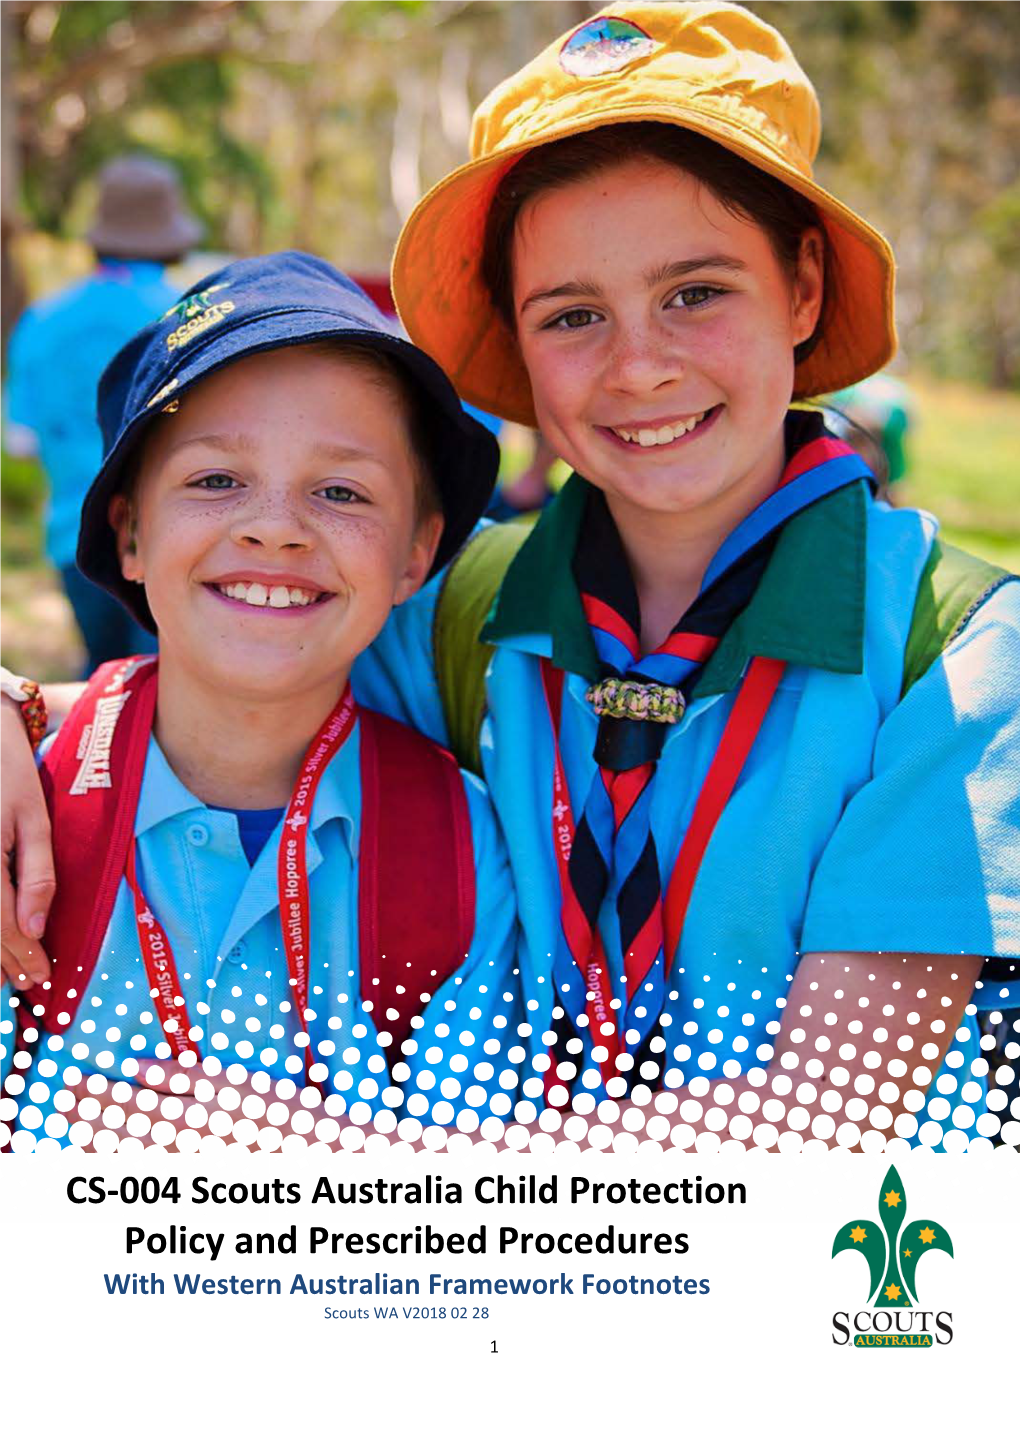 CS-004 Scouts Australia CHILD PROTECTION POLICY and PRESCRIBED PROCEDURES with Western Australian Framework Footnotes